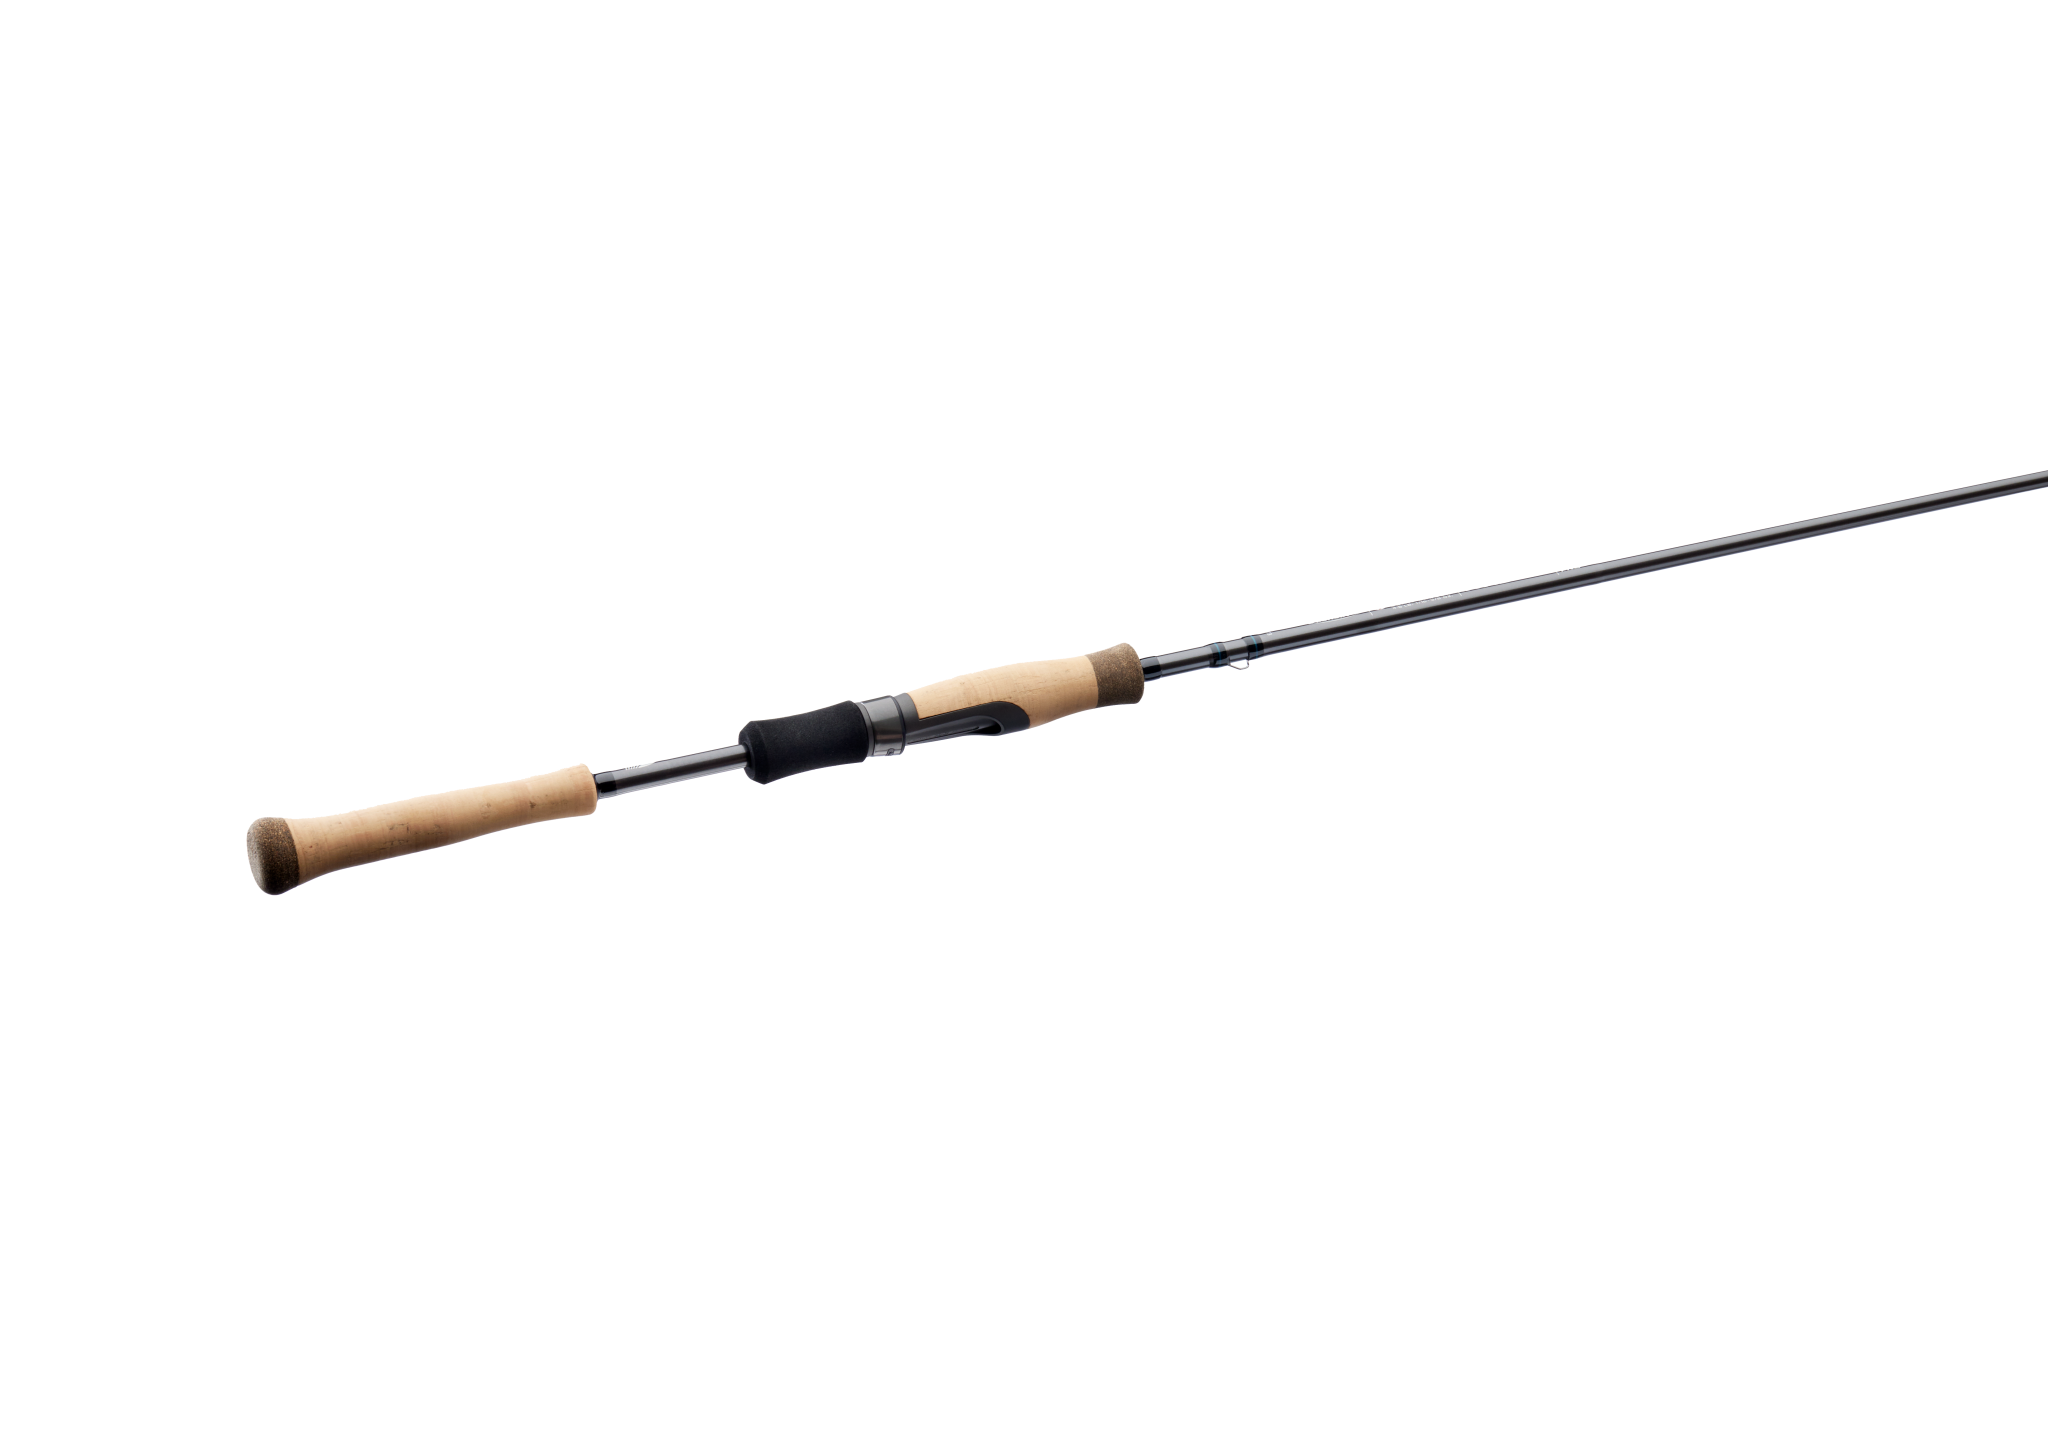 St. Croix Avid Series Walleye Spinning Rod - Tackle Shack